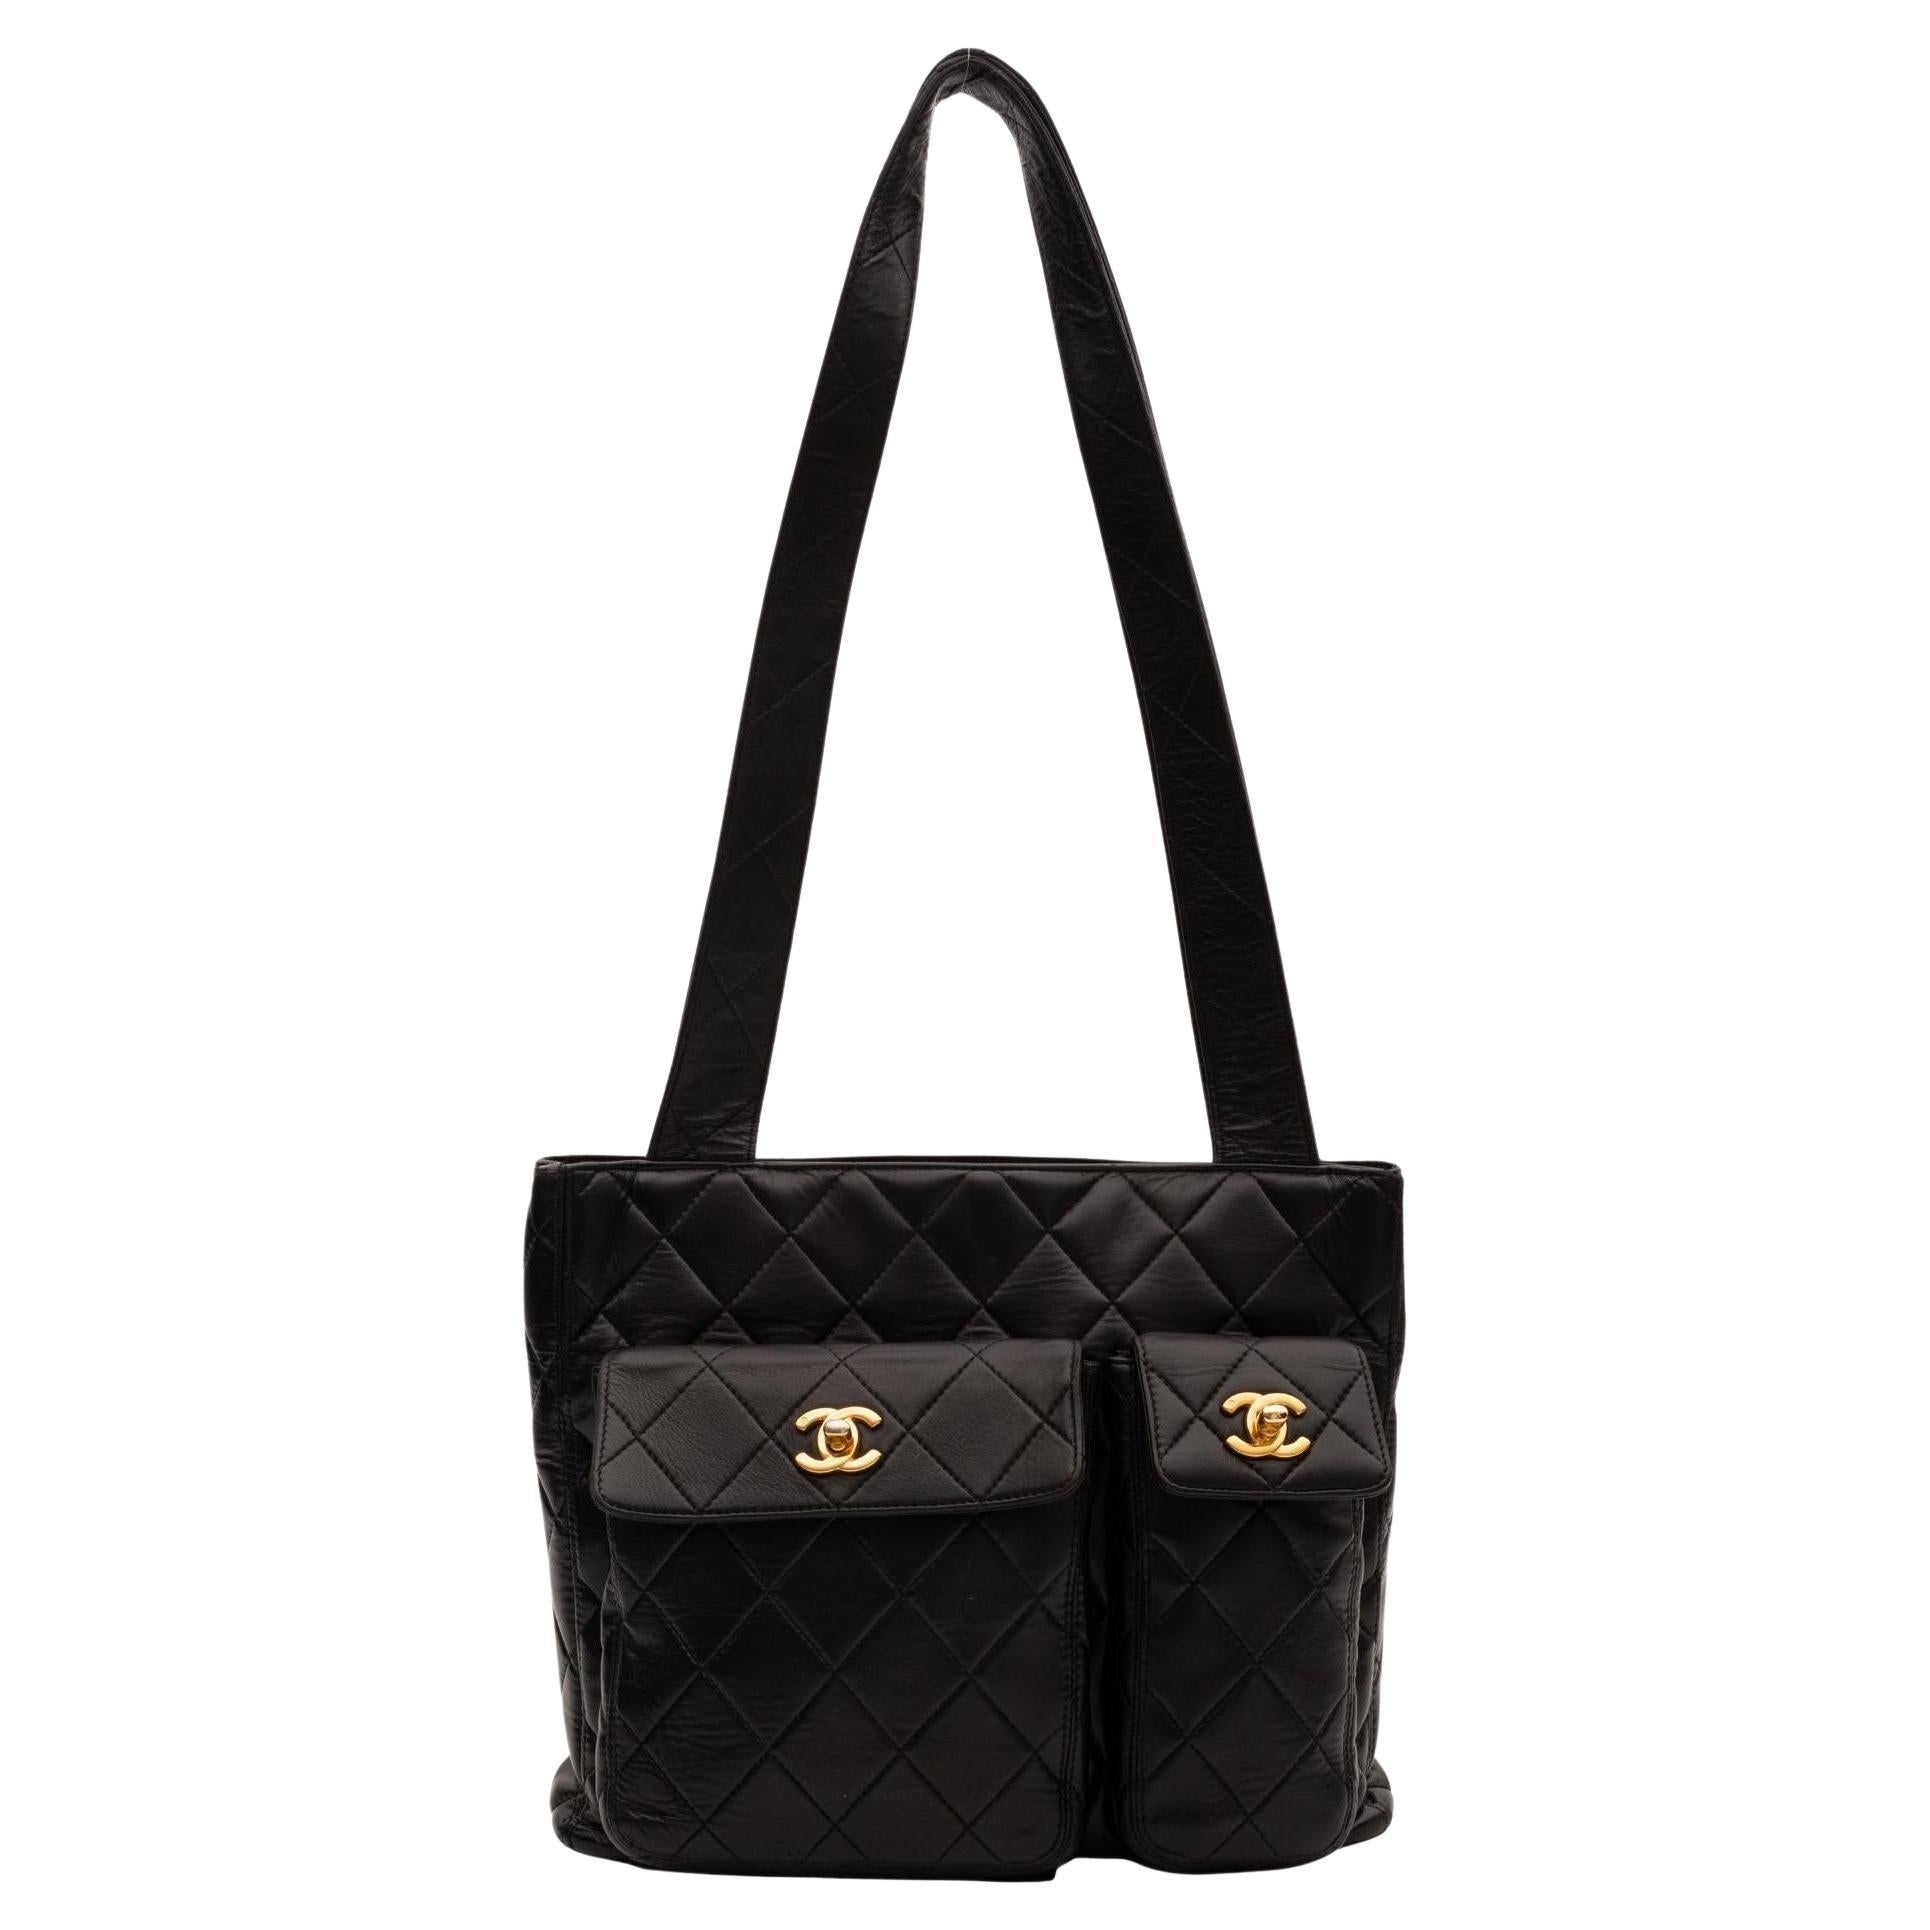 Chanel Vintage Black Quilted Lambskin Leather Tote Bag (Circa 1994)